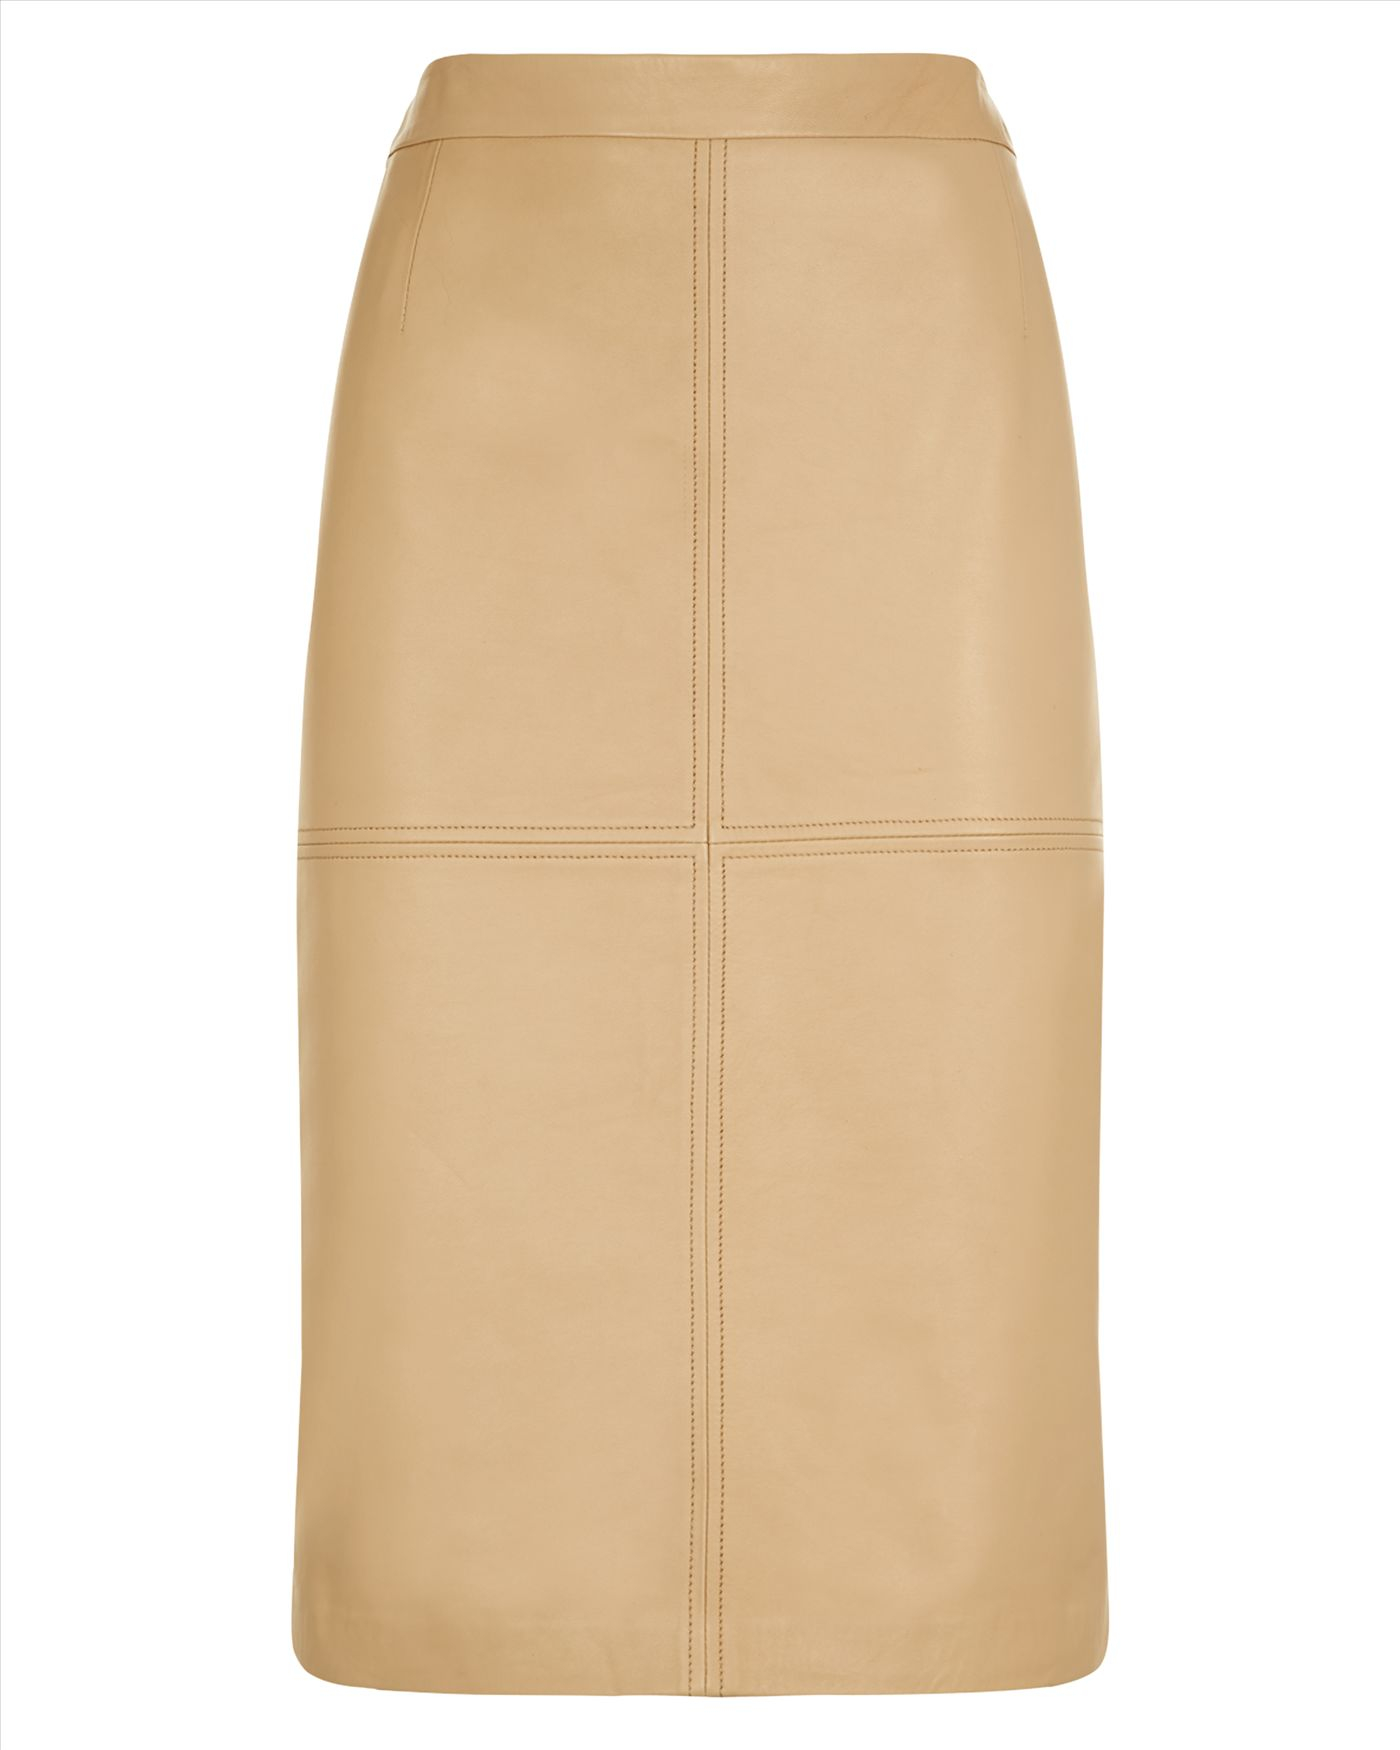 Jaeger Leather Pencil Skirt in Beige (Cuban Sand) | Lyst